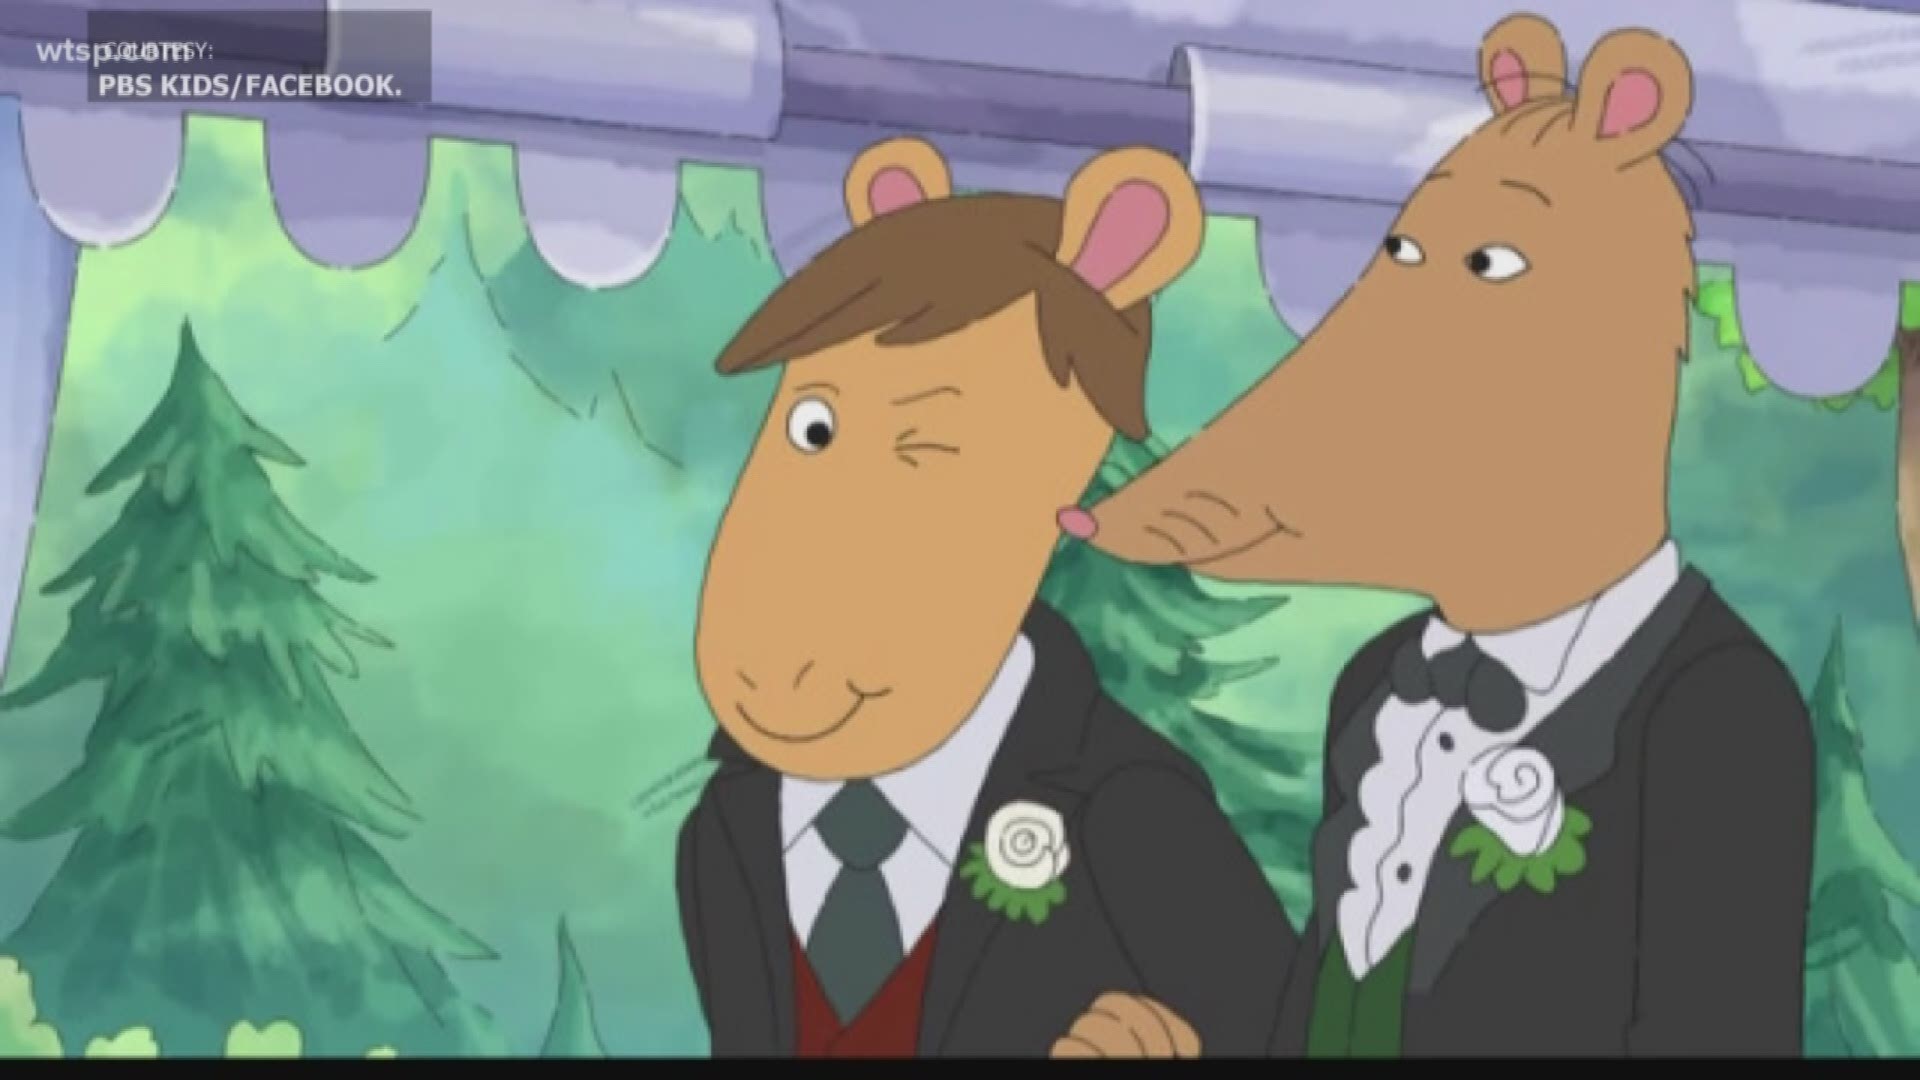 Alabama Public Television has chosen not to air an episode of the PBS children's show "Arthur" because it included a same-sex wedding.

The episode "Mr. Ratburn and the Special Someone" aired nationally on May 13, showing Arthur attending the wedding of his teacher and partner.

APT showed a re-run instead.